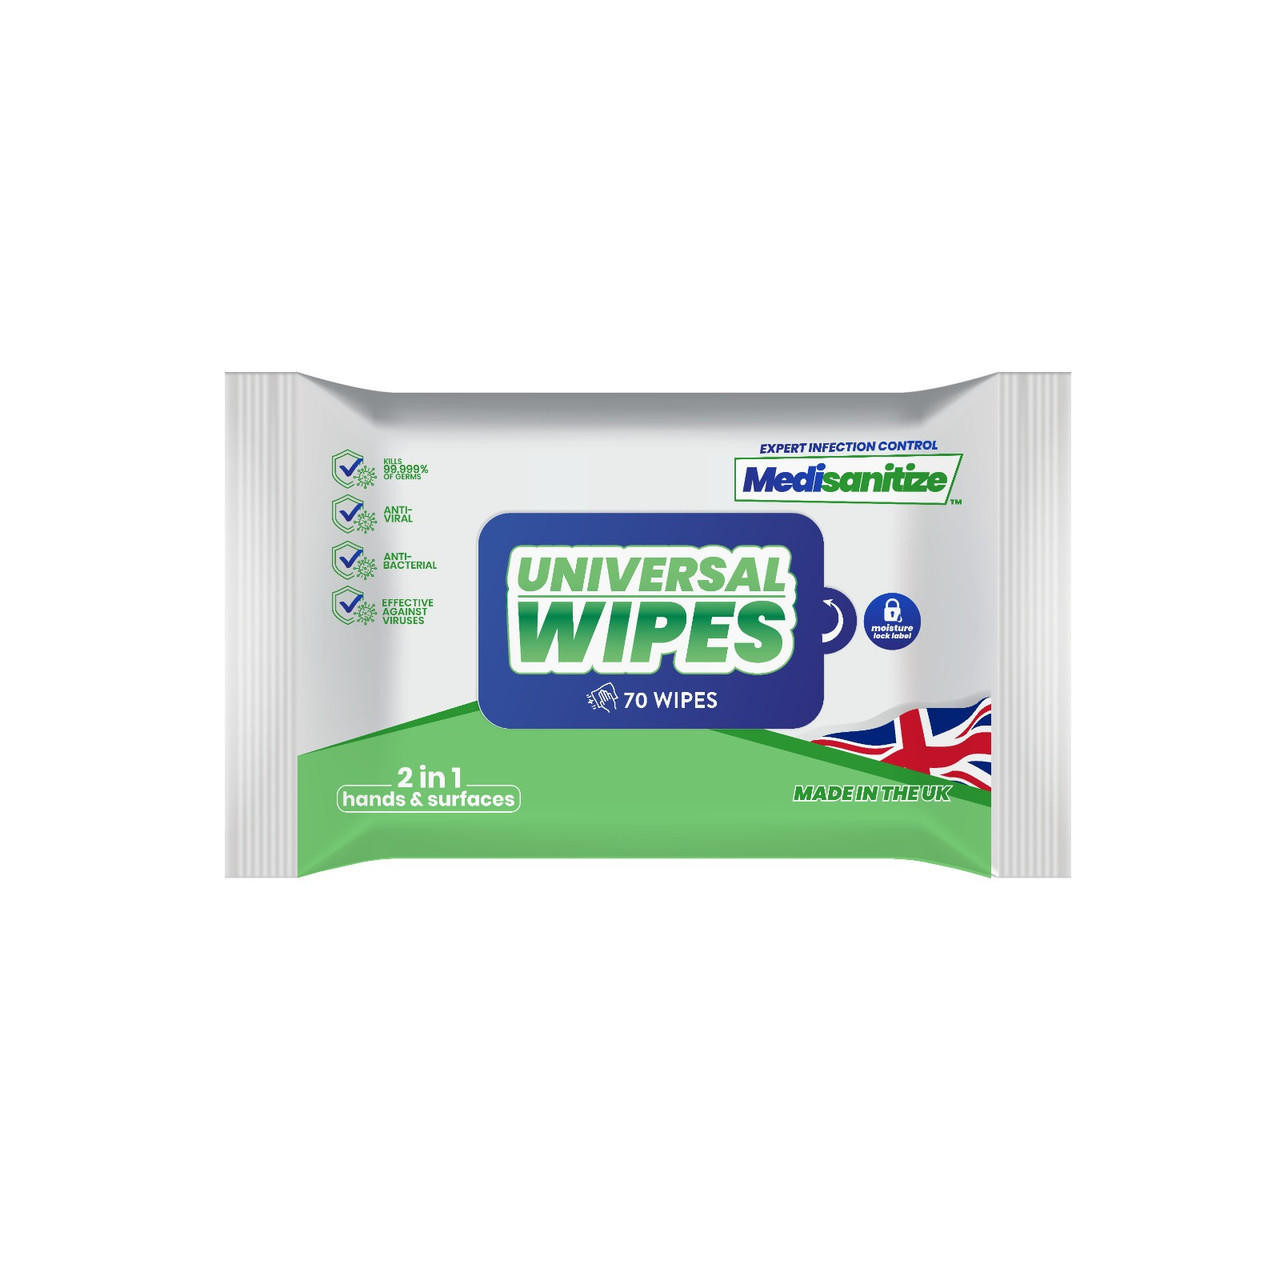 Medisanitize Antibacterial Sanitising Wipes Pack of 70 for Hand and Surfaces or Medisanitize